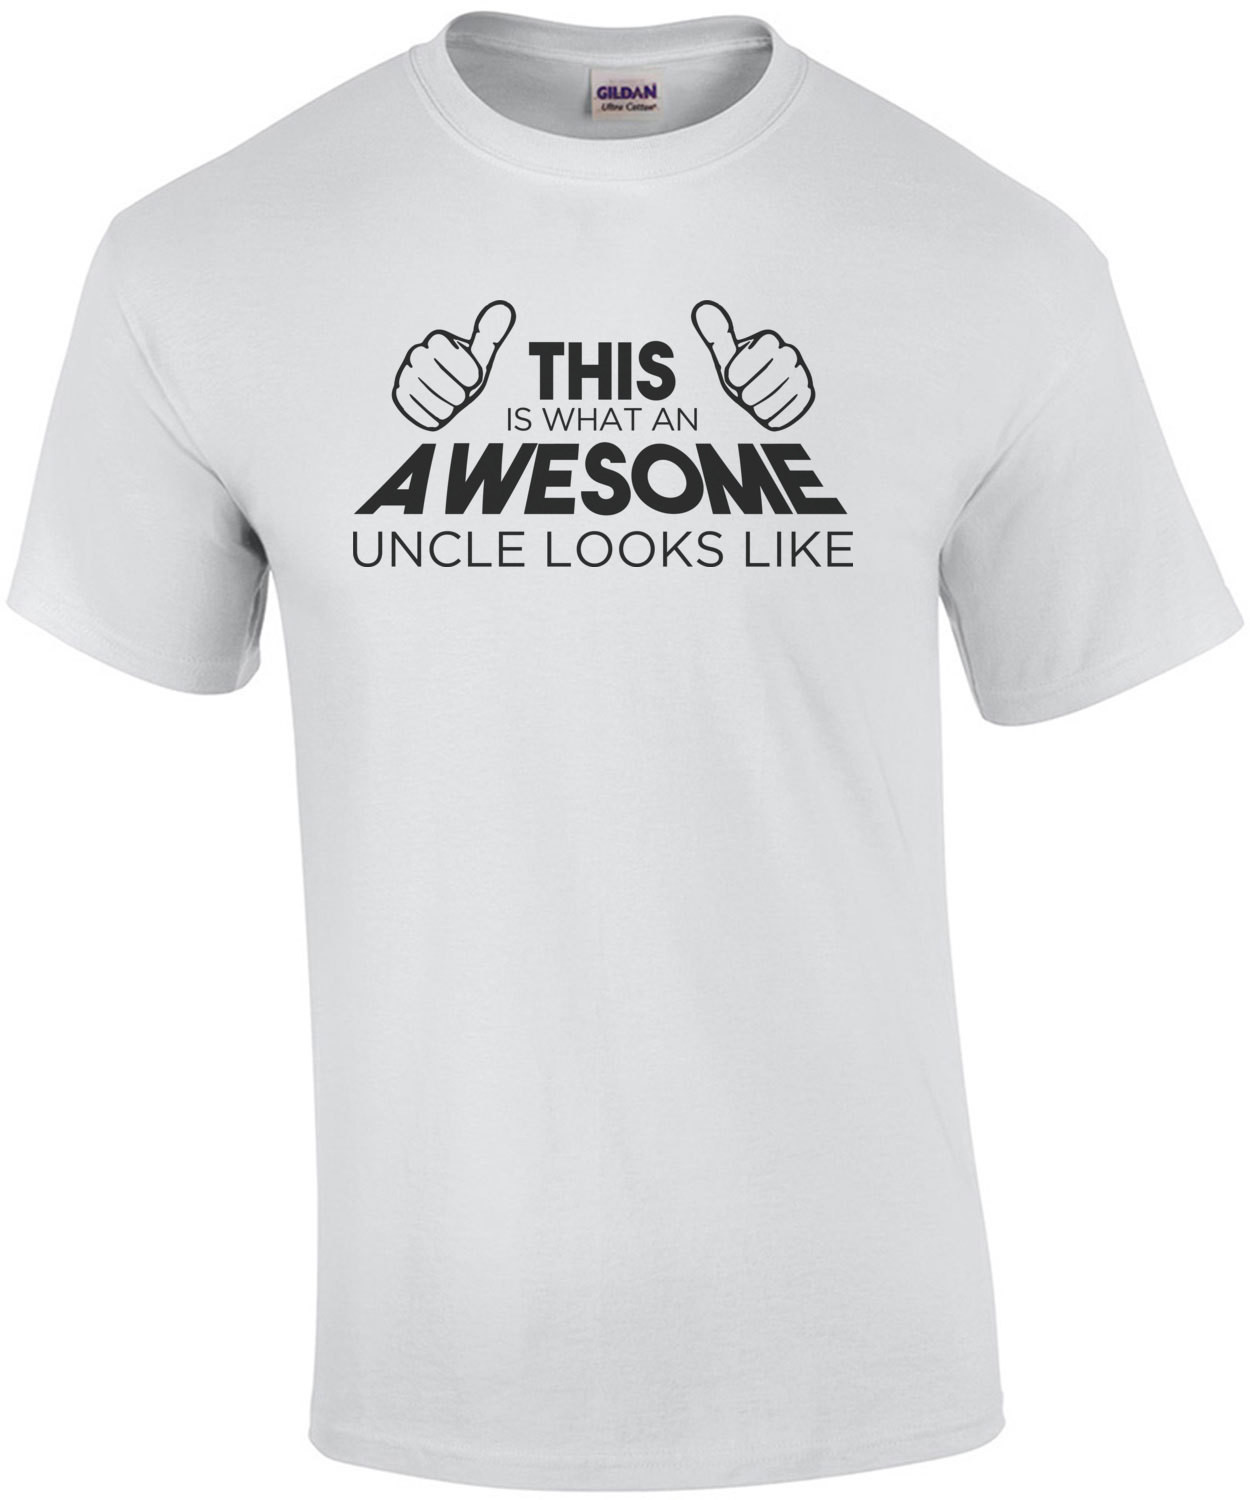 This is what an awesome uncle looks like - funny uncle t-shirt